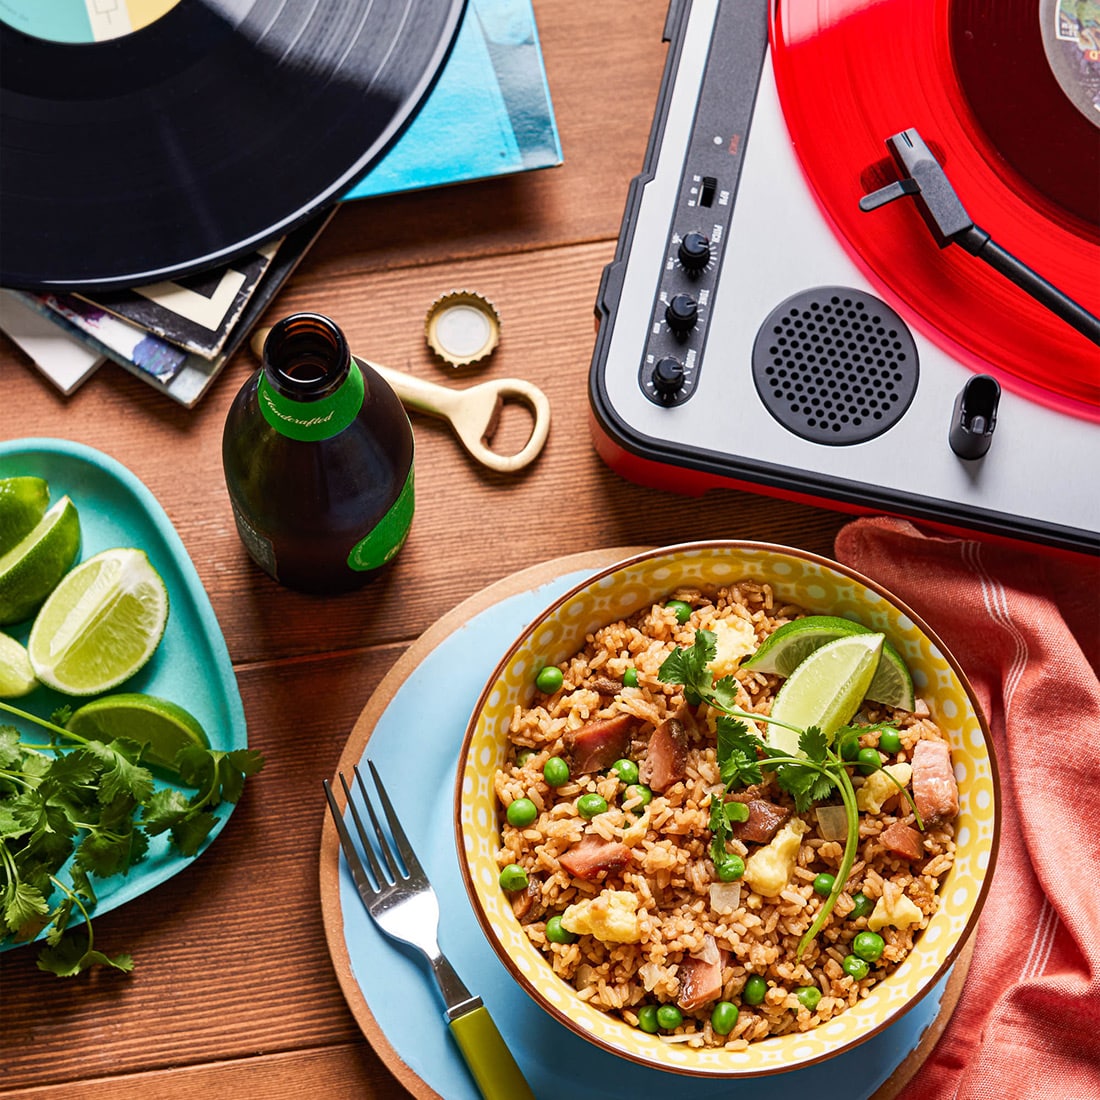 a tabletop view of a delicious bowl of BBQ pork fried rice sitting amidst records and a record player with a bright red vinyl on the turntable. There is an open beer and a plate of limes and cilantro next to it.